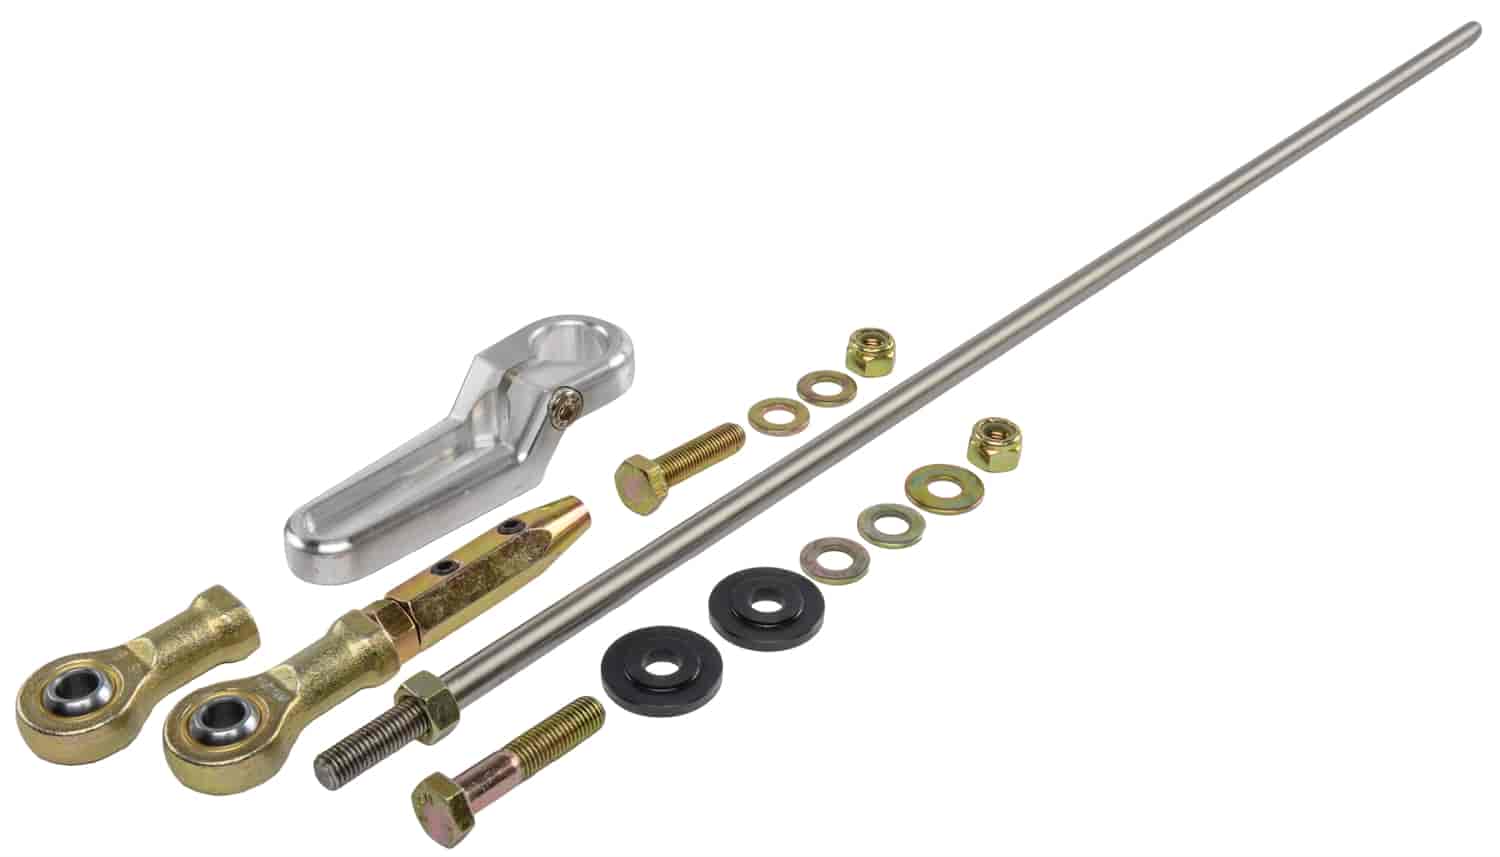 Column Linkage Shift Kit for Ford C4 and C6